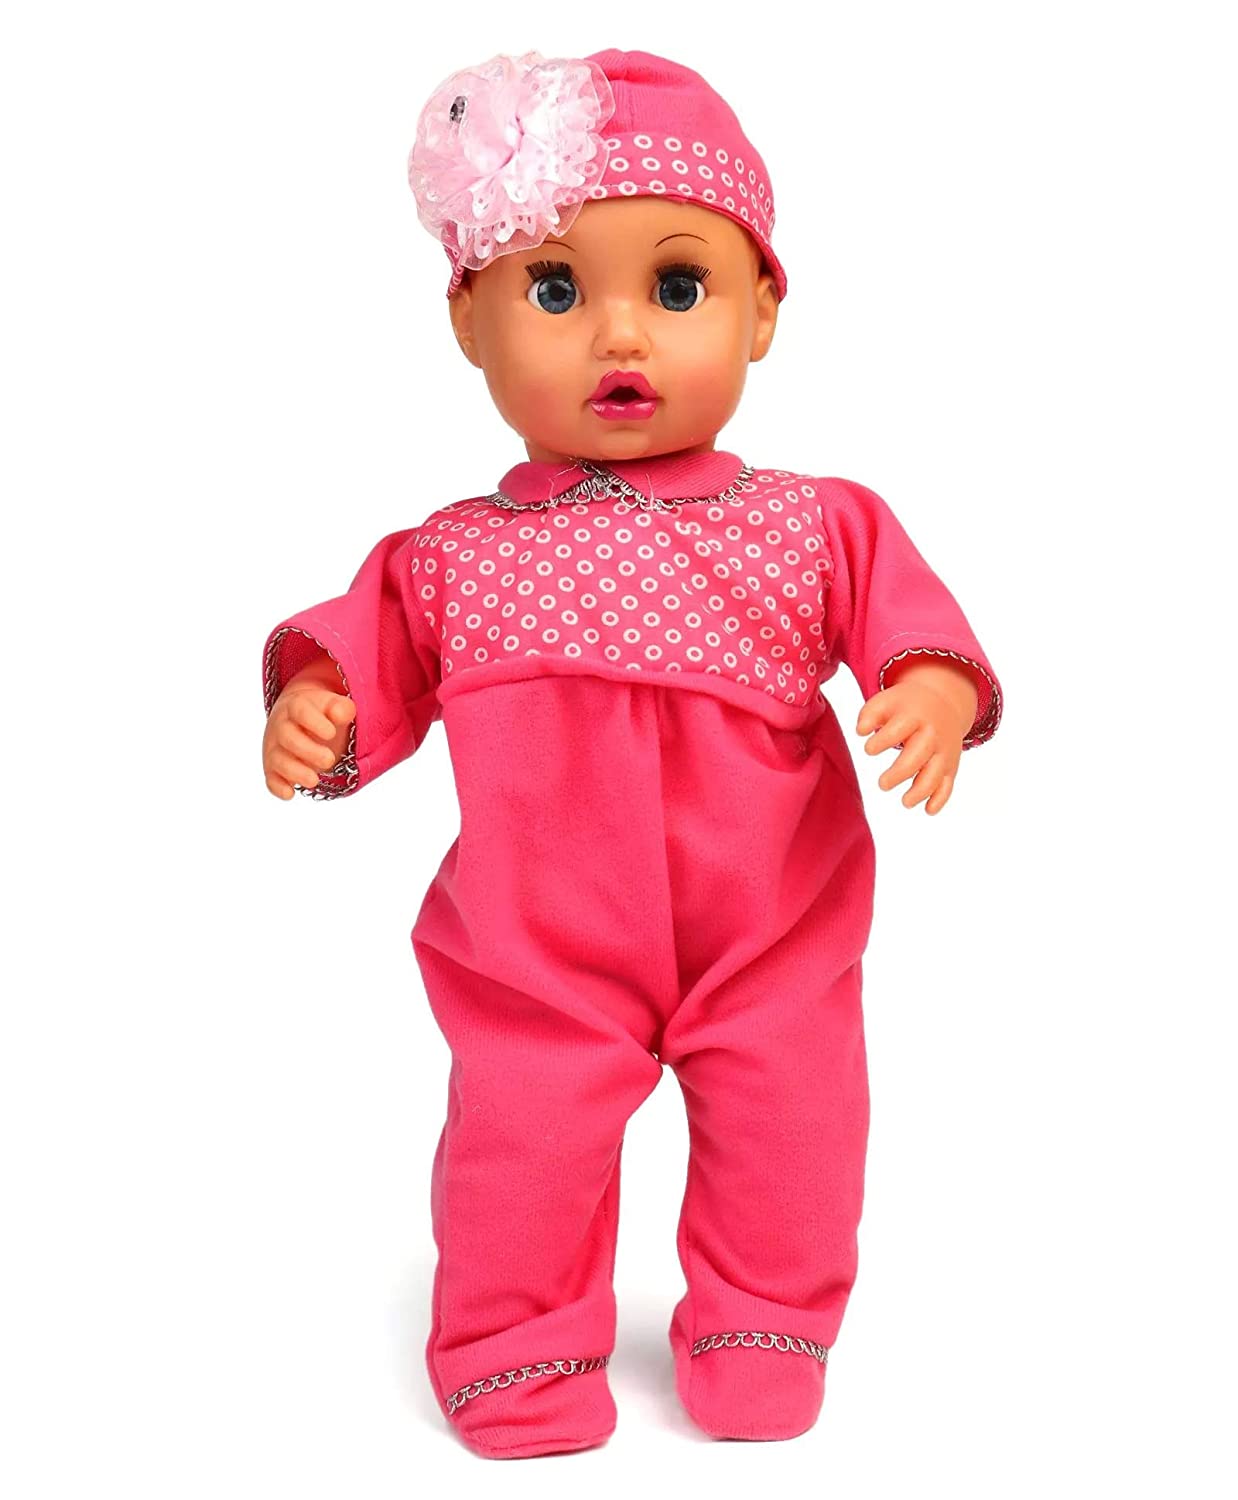 Speedage Princess Doll Lifelike Features 40 cm, Safe Materials, Inspires Creativity - Perfect Gift for Girls Aged 3-10 - Pink